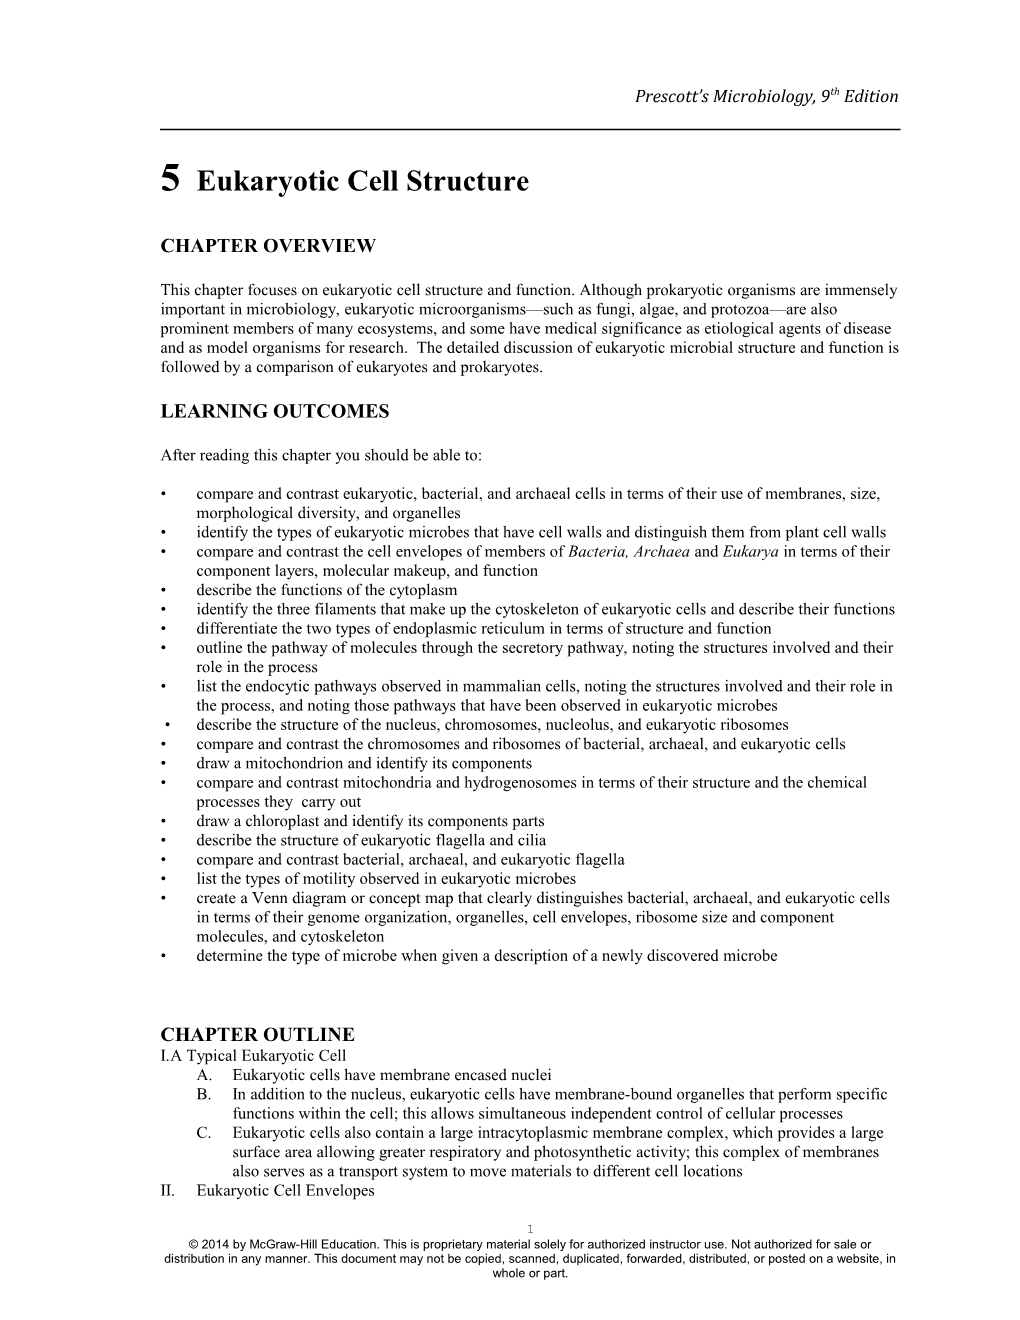 5Eukaryotic Cell Structure